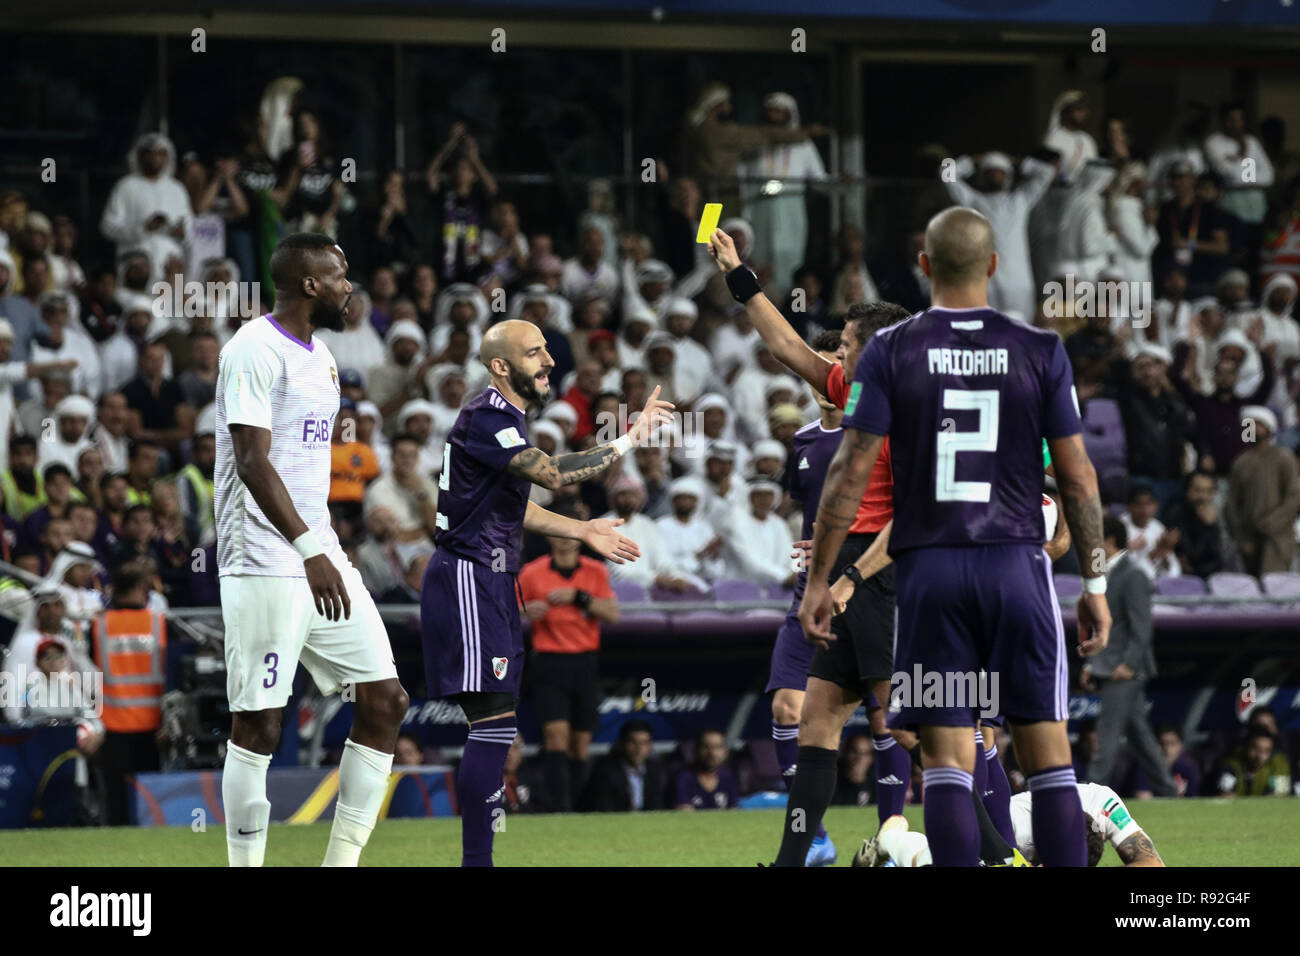 Al Ain, United Arab Emirates. 18th Dec, 2018. River Plate's Javier Pinola is shown a yellow card during the FIFA Club World Cup Semi-Final soccer match between UAE's Al Ain FC and Argentina's River Plate at Hazza Bin Zayed Stadium. Credit: Mohamed Flis/dpa/Alamy Live News Stock Photo